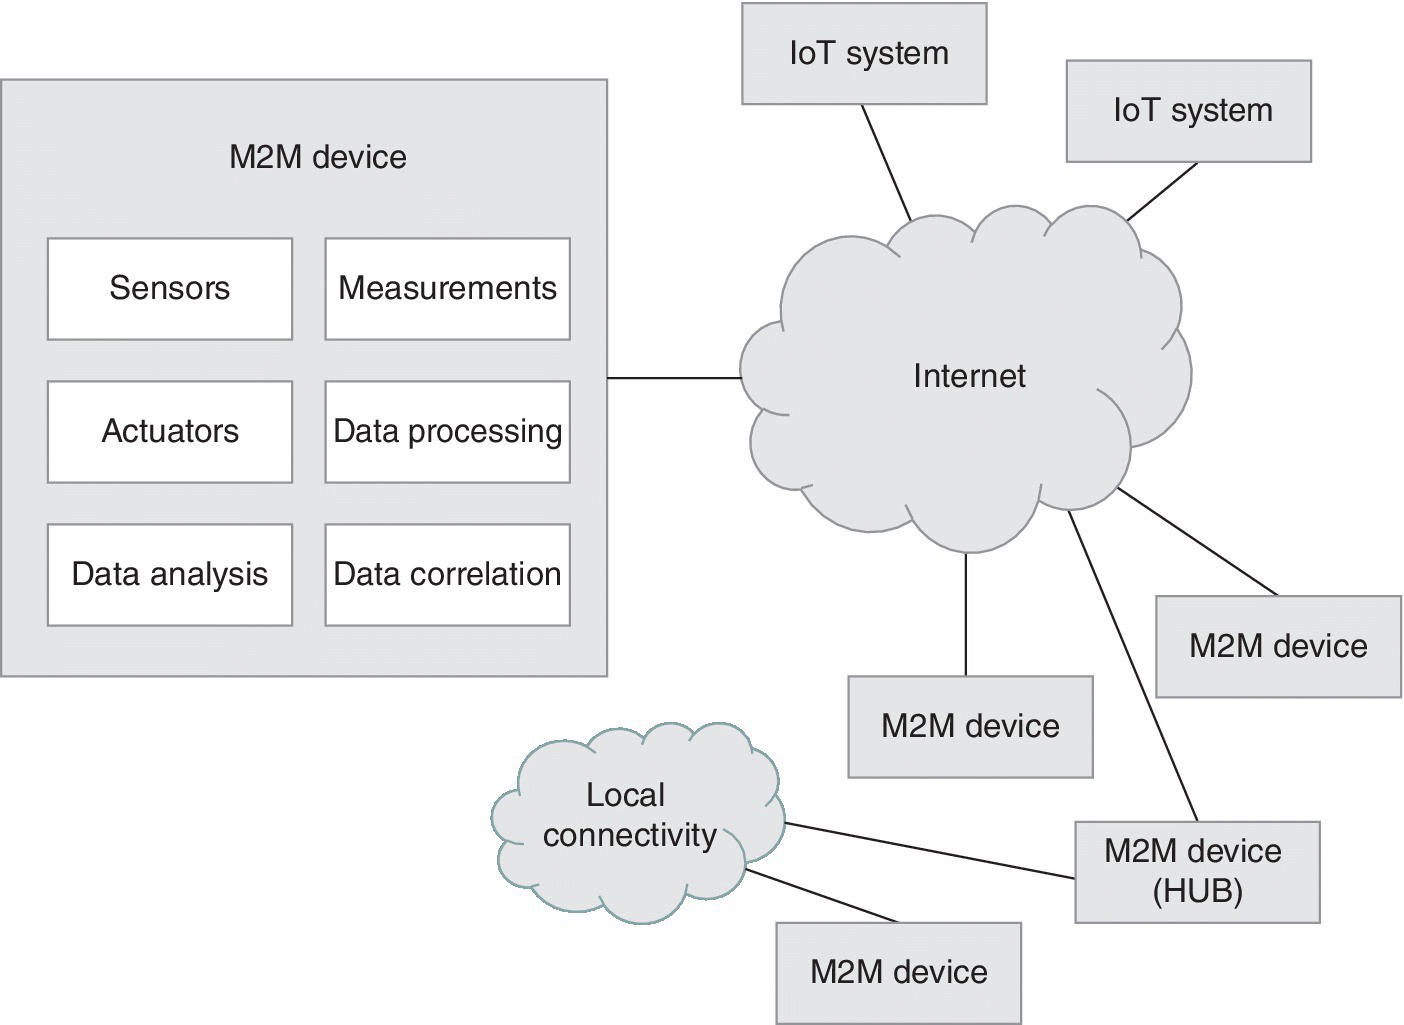 Schematic of the IoT illustrating internet connected to IoT systems, M2M devices, local connectivity, and an M2M device with sensors, actuators, data analysis, measurements, data processing and correlation.